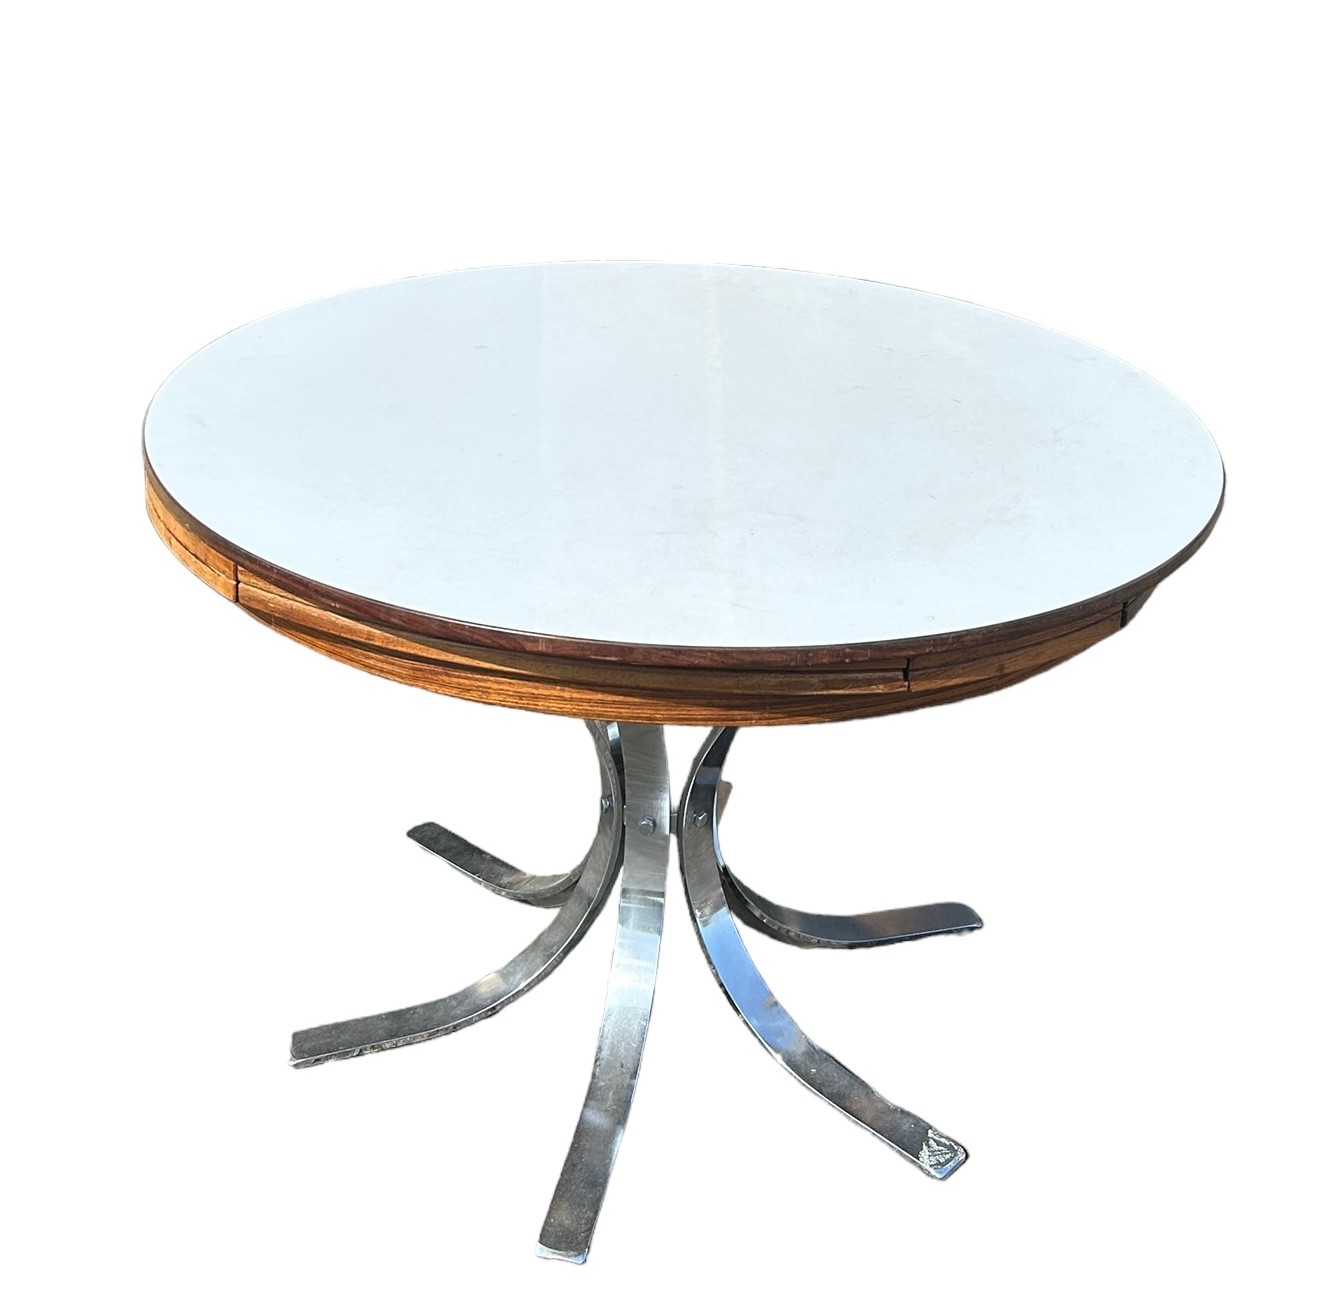 ORIGINAL EXTENDING 1960'S DANISH DINING TABLE BY DRYLUND ON CHROME BASE, Original label and stamps. - Image 3 of 11